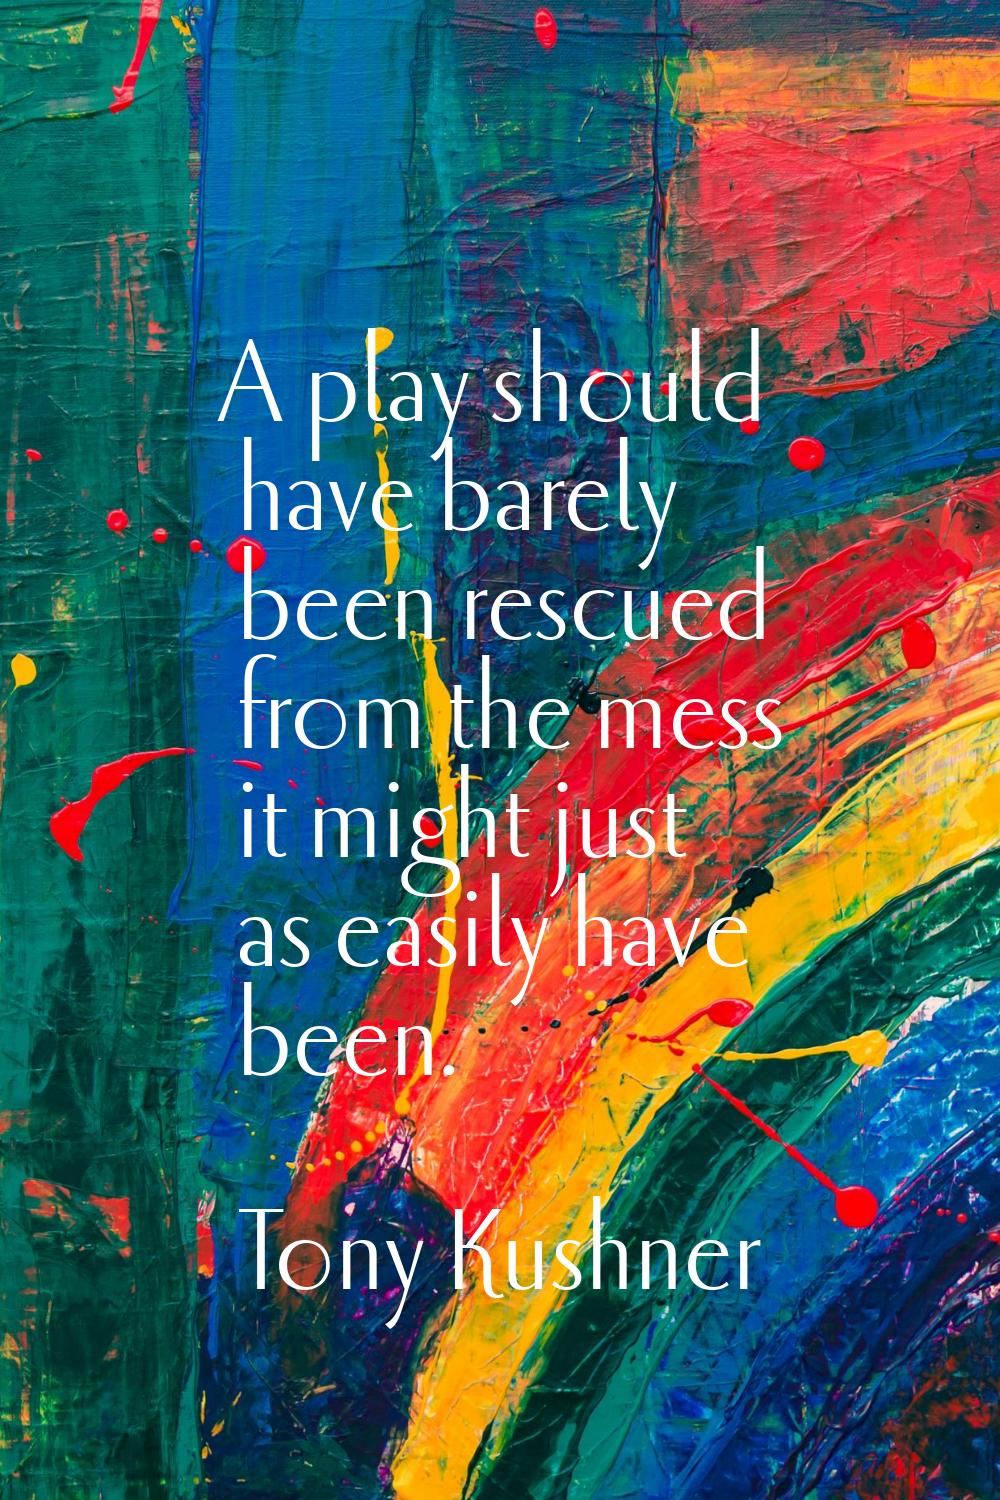 A play should have barely been rescued from the mess it might just as easily have been.